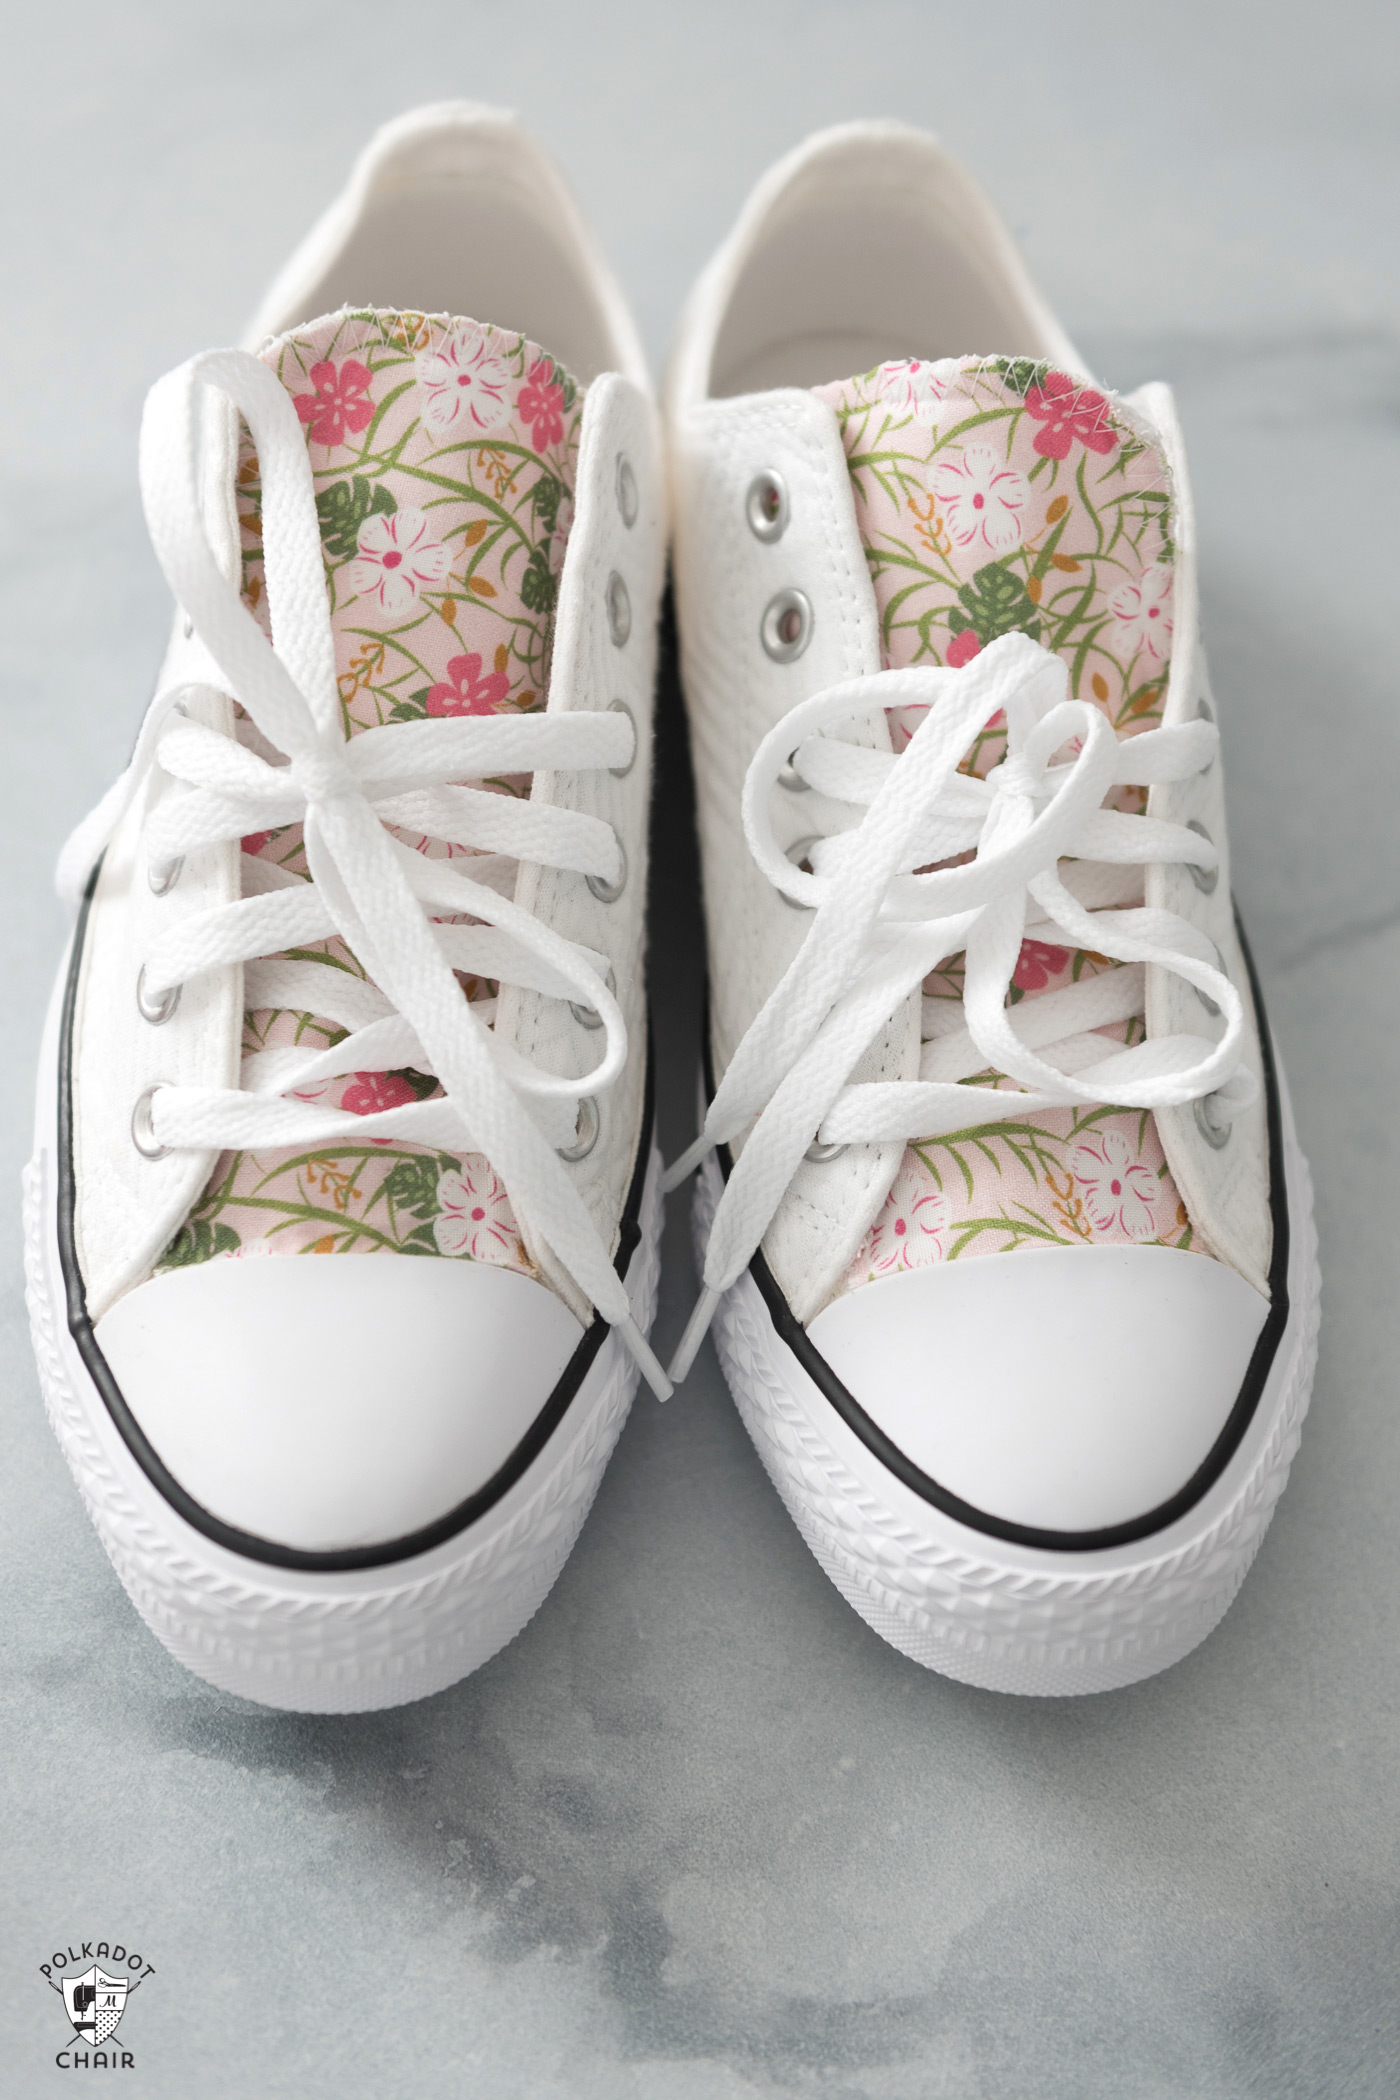 How to customize your converse with fabric - a DIY way to decorate the tongue of your converse shoes. How to add fabric to shoes #DIYfashion #DIYConverse #CustomConverse #CustomShoes #DIYCustomShoes #decorateshoes